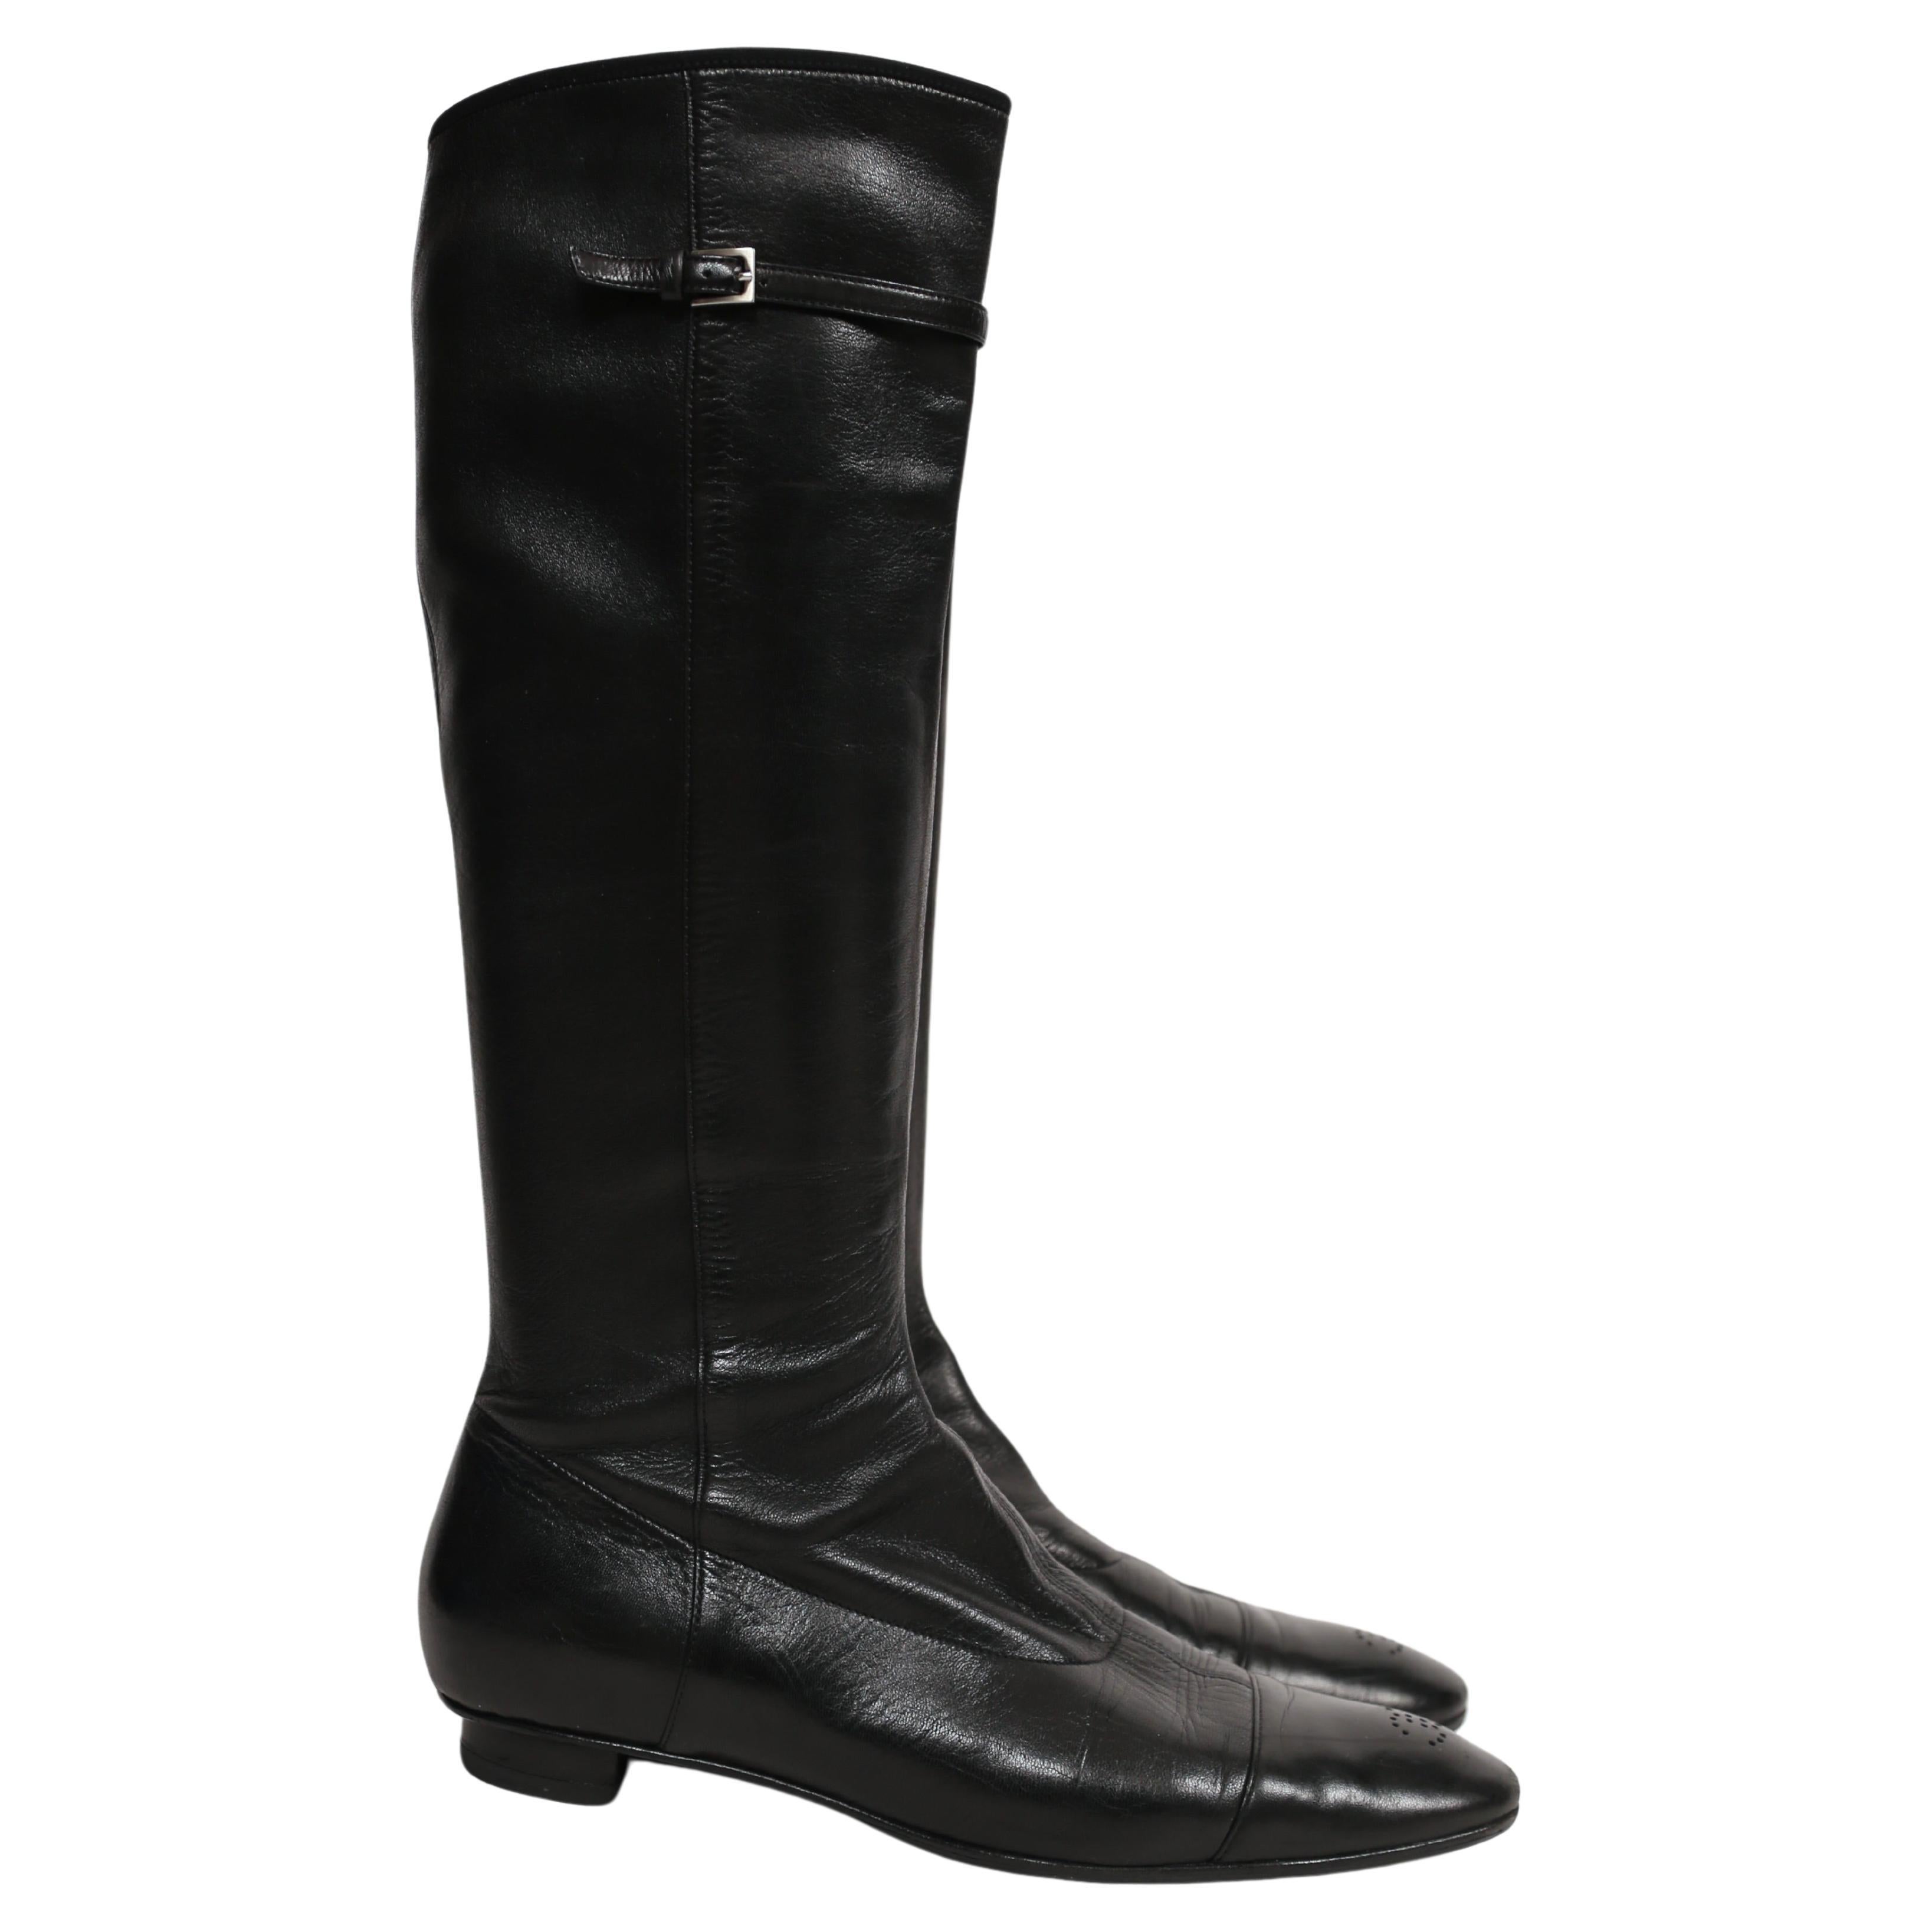 Black stretch leather boots with CC detail at toes designed by Chanel dating to the late 1990's, early 2000's. French Size 39.5 (US 9-9.5).  Composed entirely of leather. Pull on entry. Protective soles were added. Made in Italy. Good condition.
